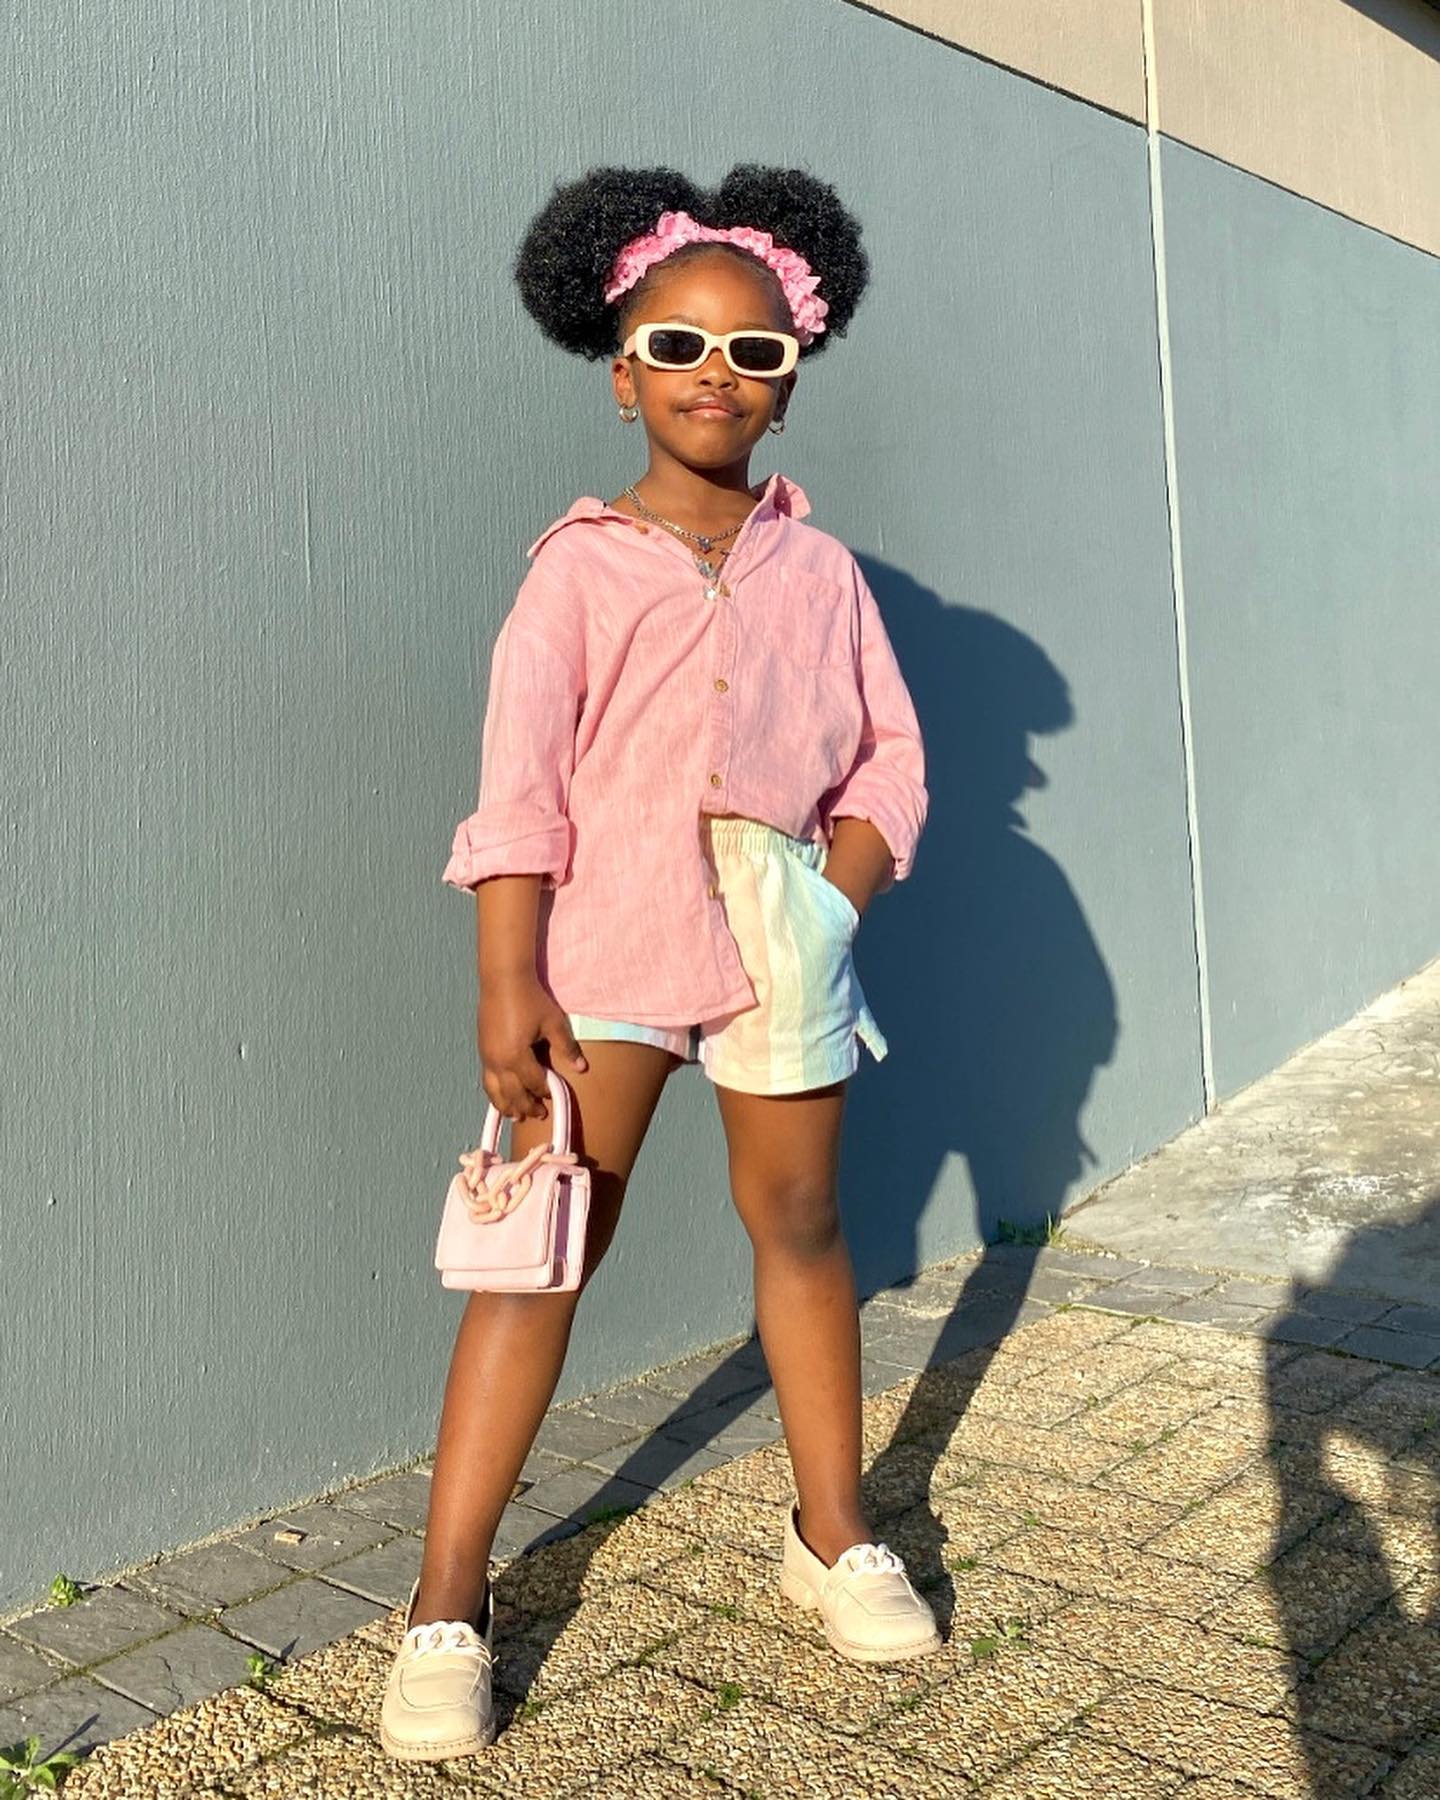 Kids Dresses: How to Stylishly Dress Your Kids For Events